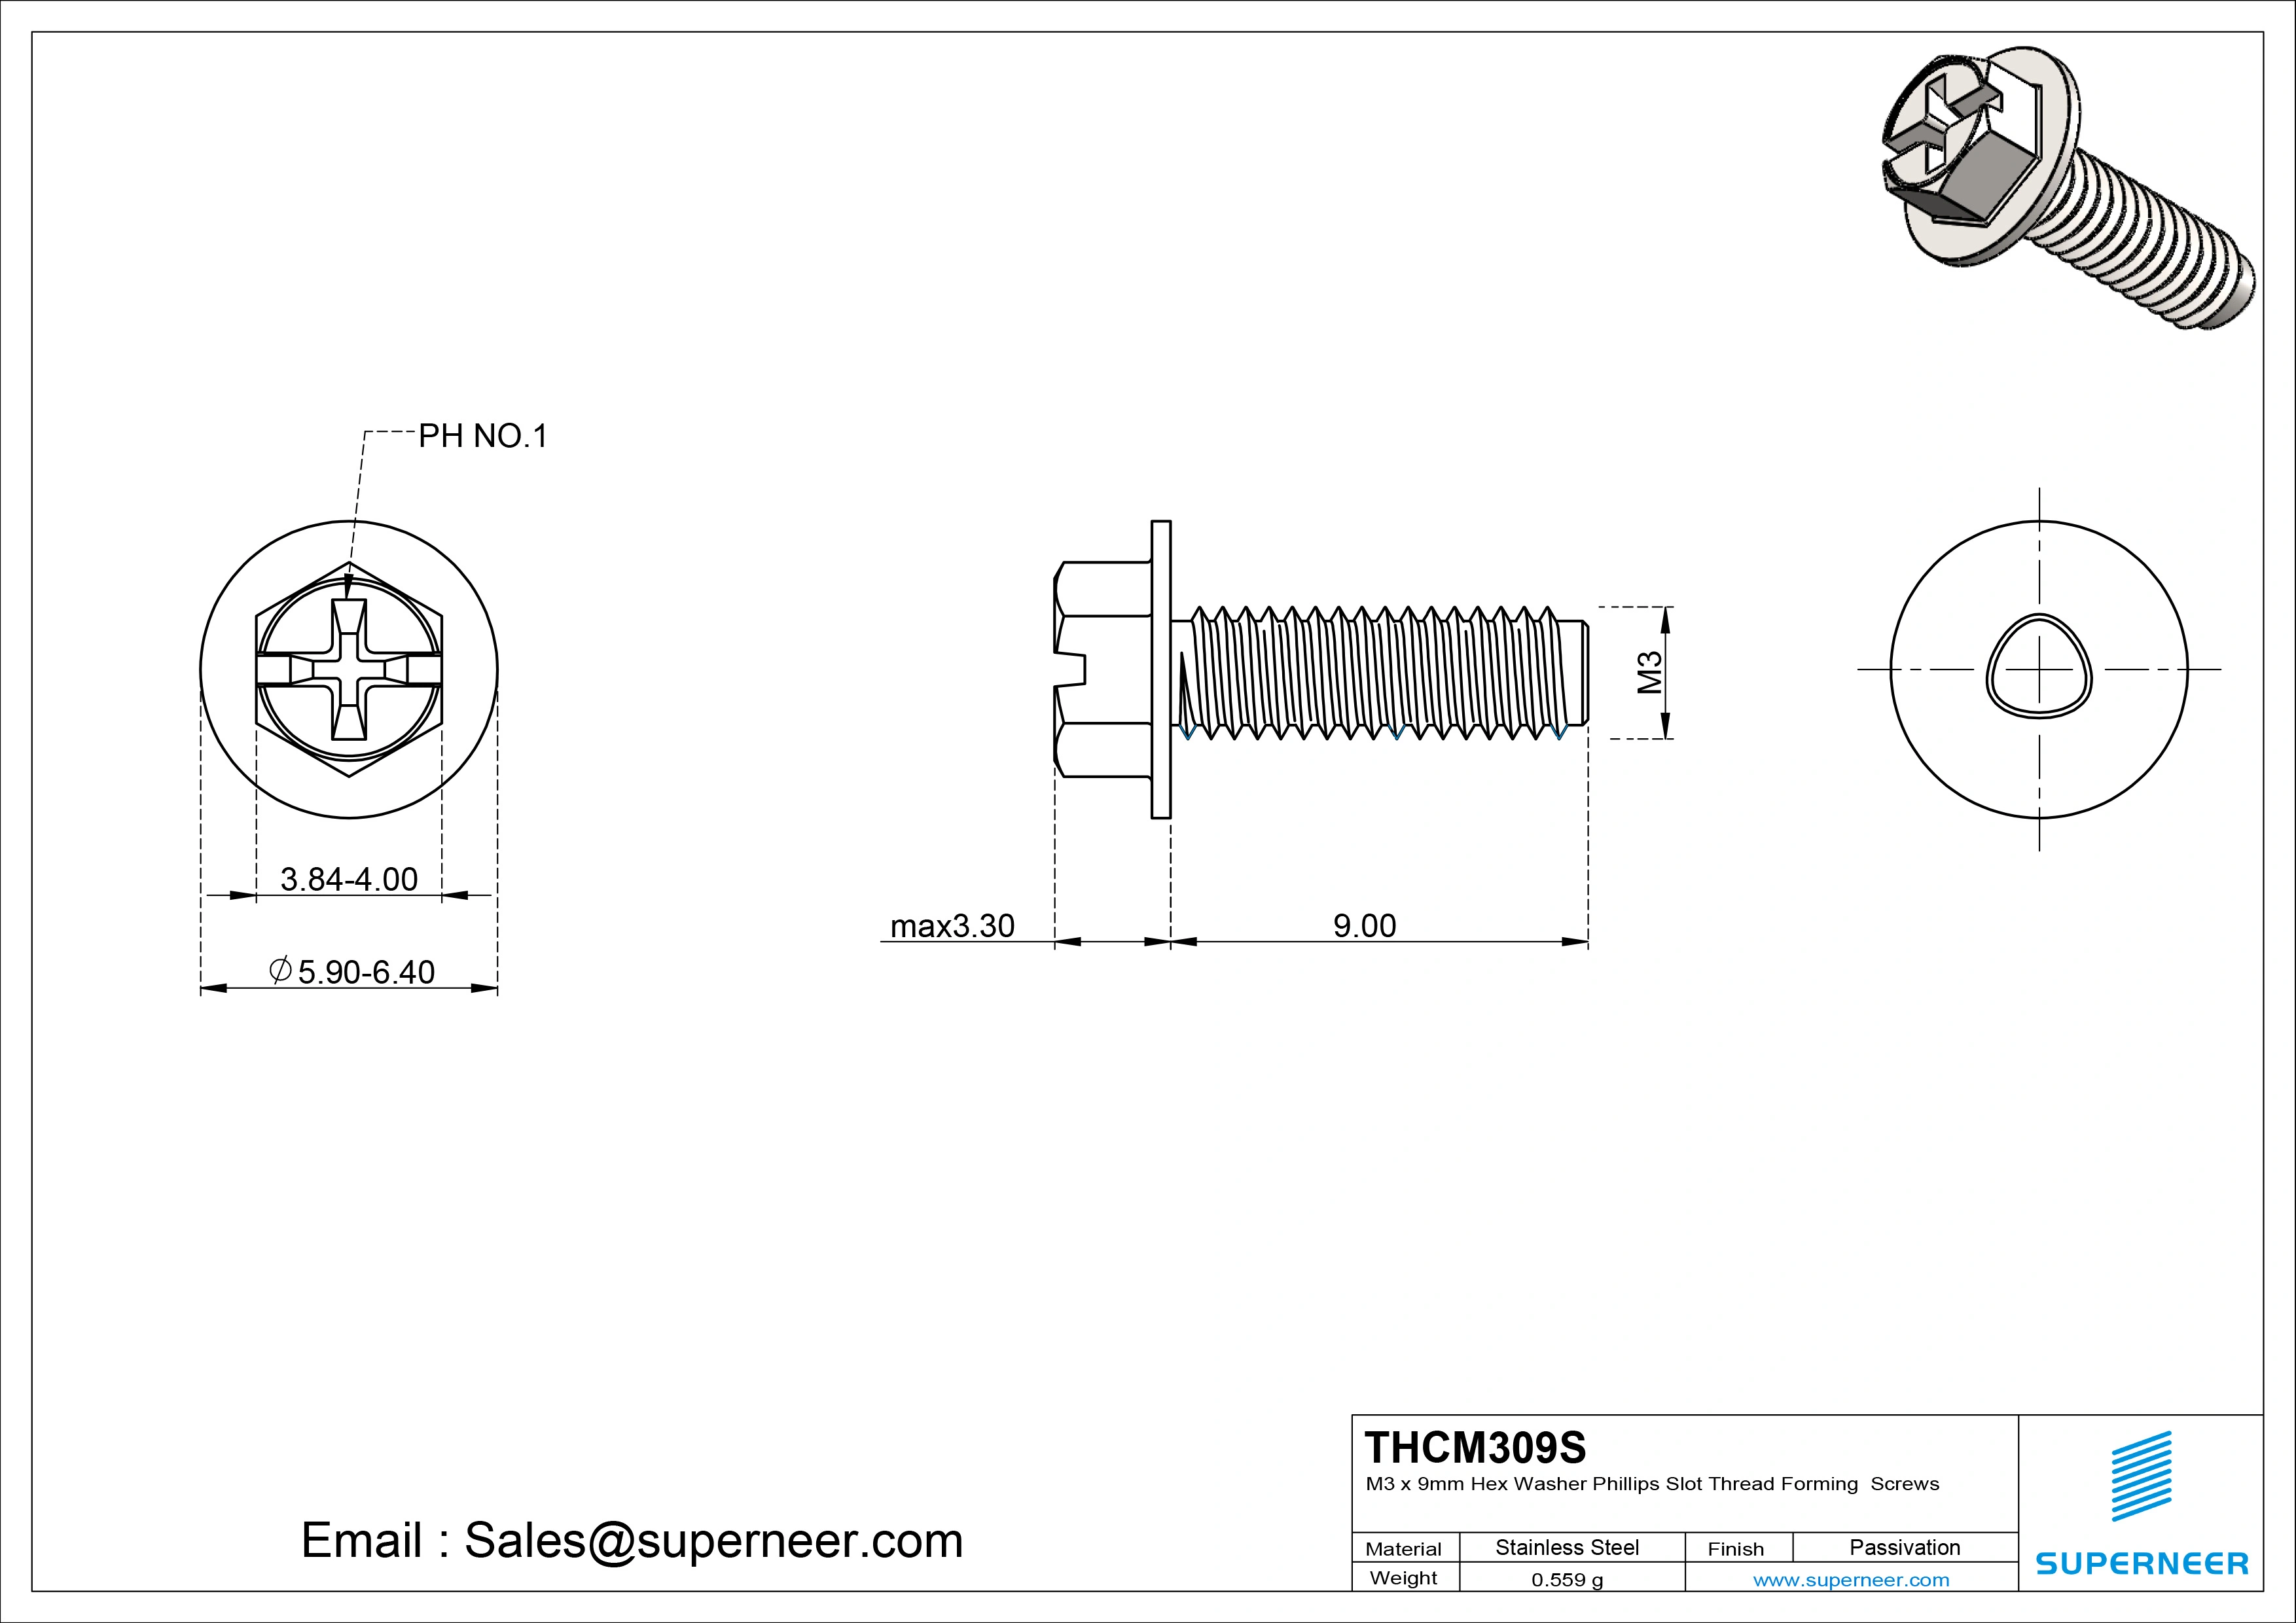 M3 × 9mm Indented Hex Washer Phillips Slot Thread Forming Screws for Metal SUS304 Stainless Steel Inox